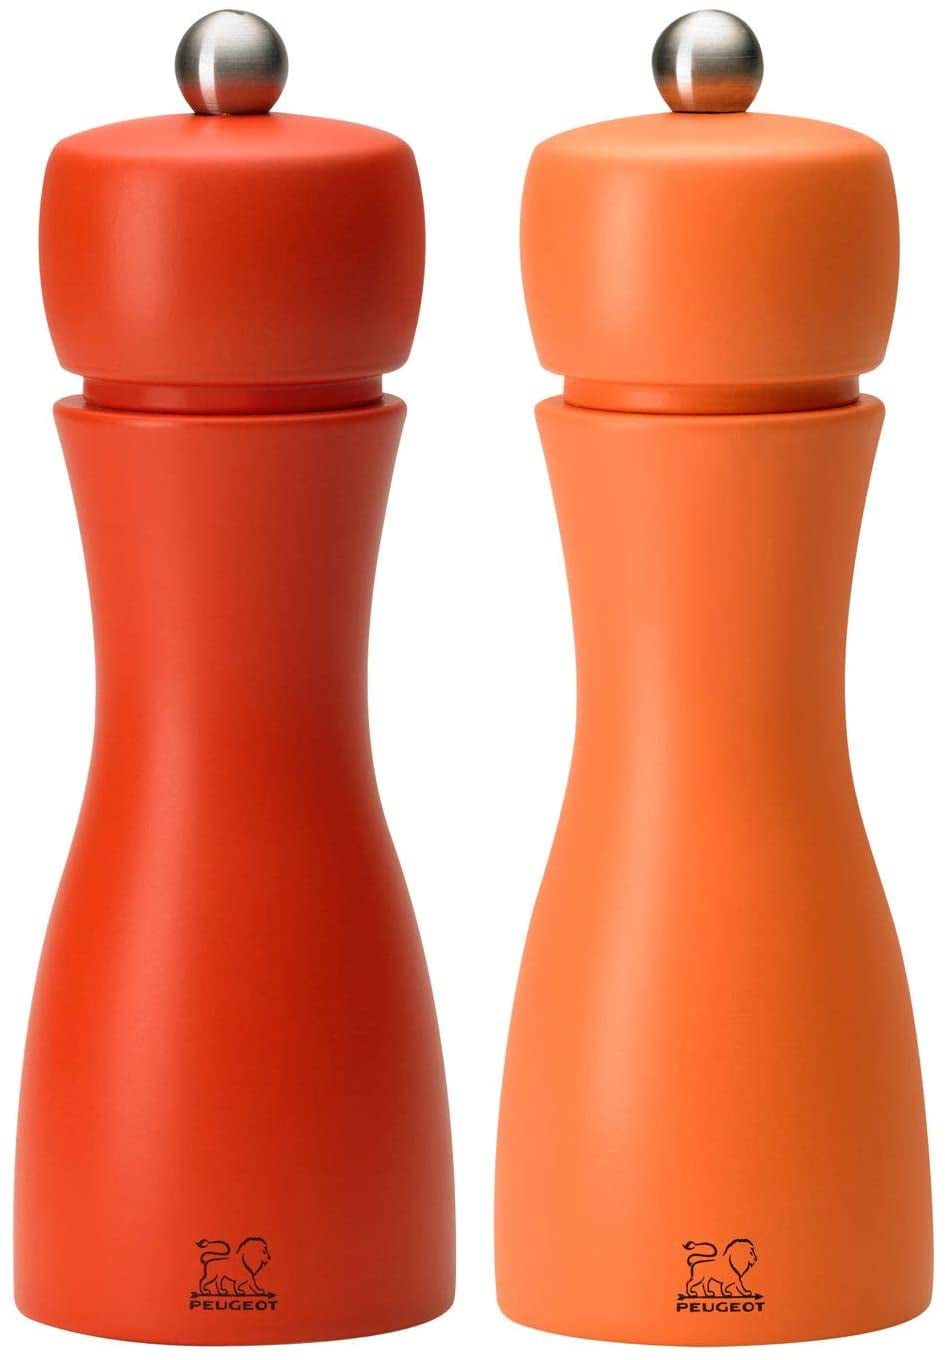 6 Shadow of Pink Peugeot Tahiti Duo Spring Salt and Pepper Mill Set 15cm 